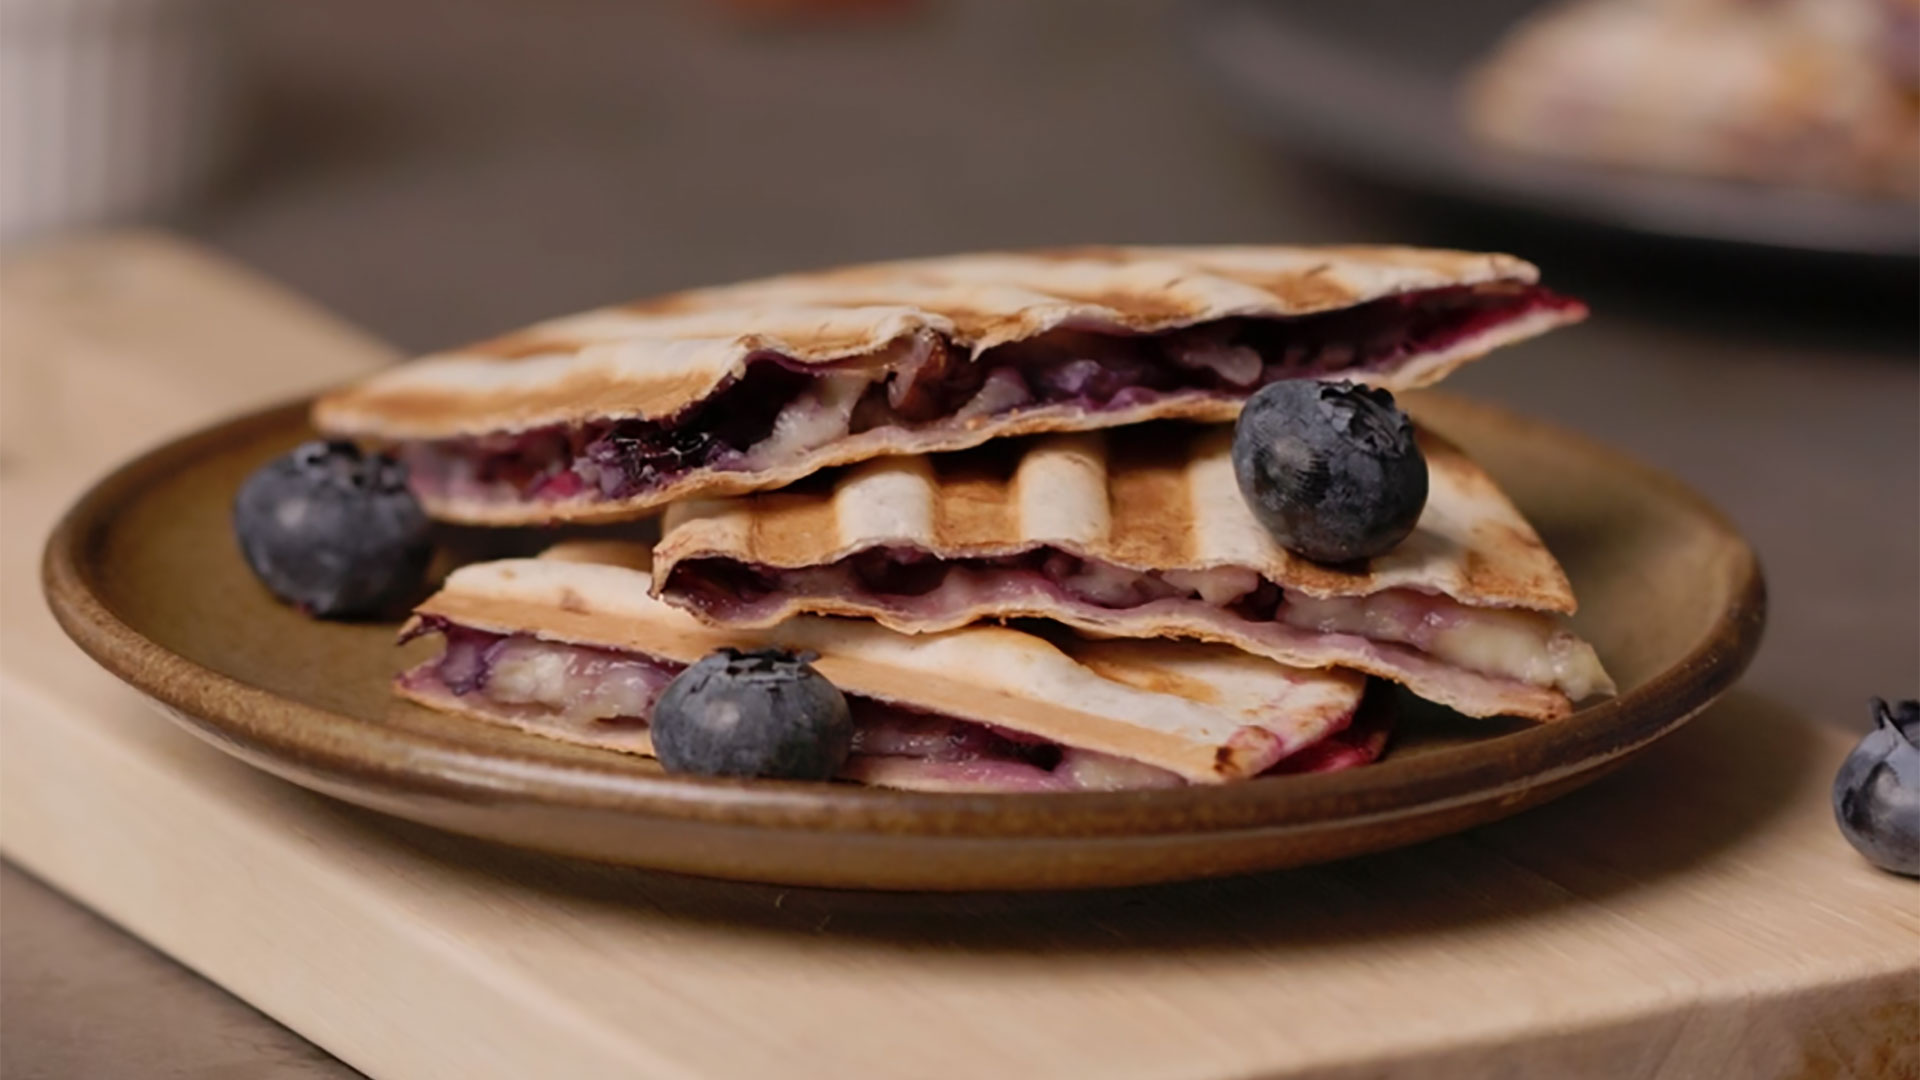 Blueberry and brie quesadilla